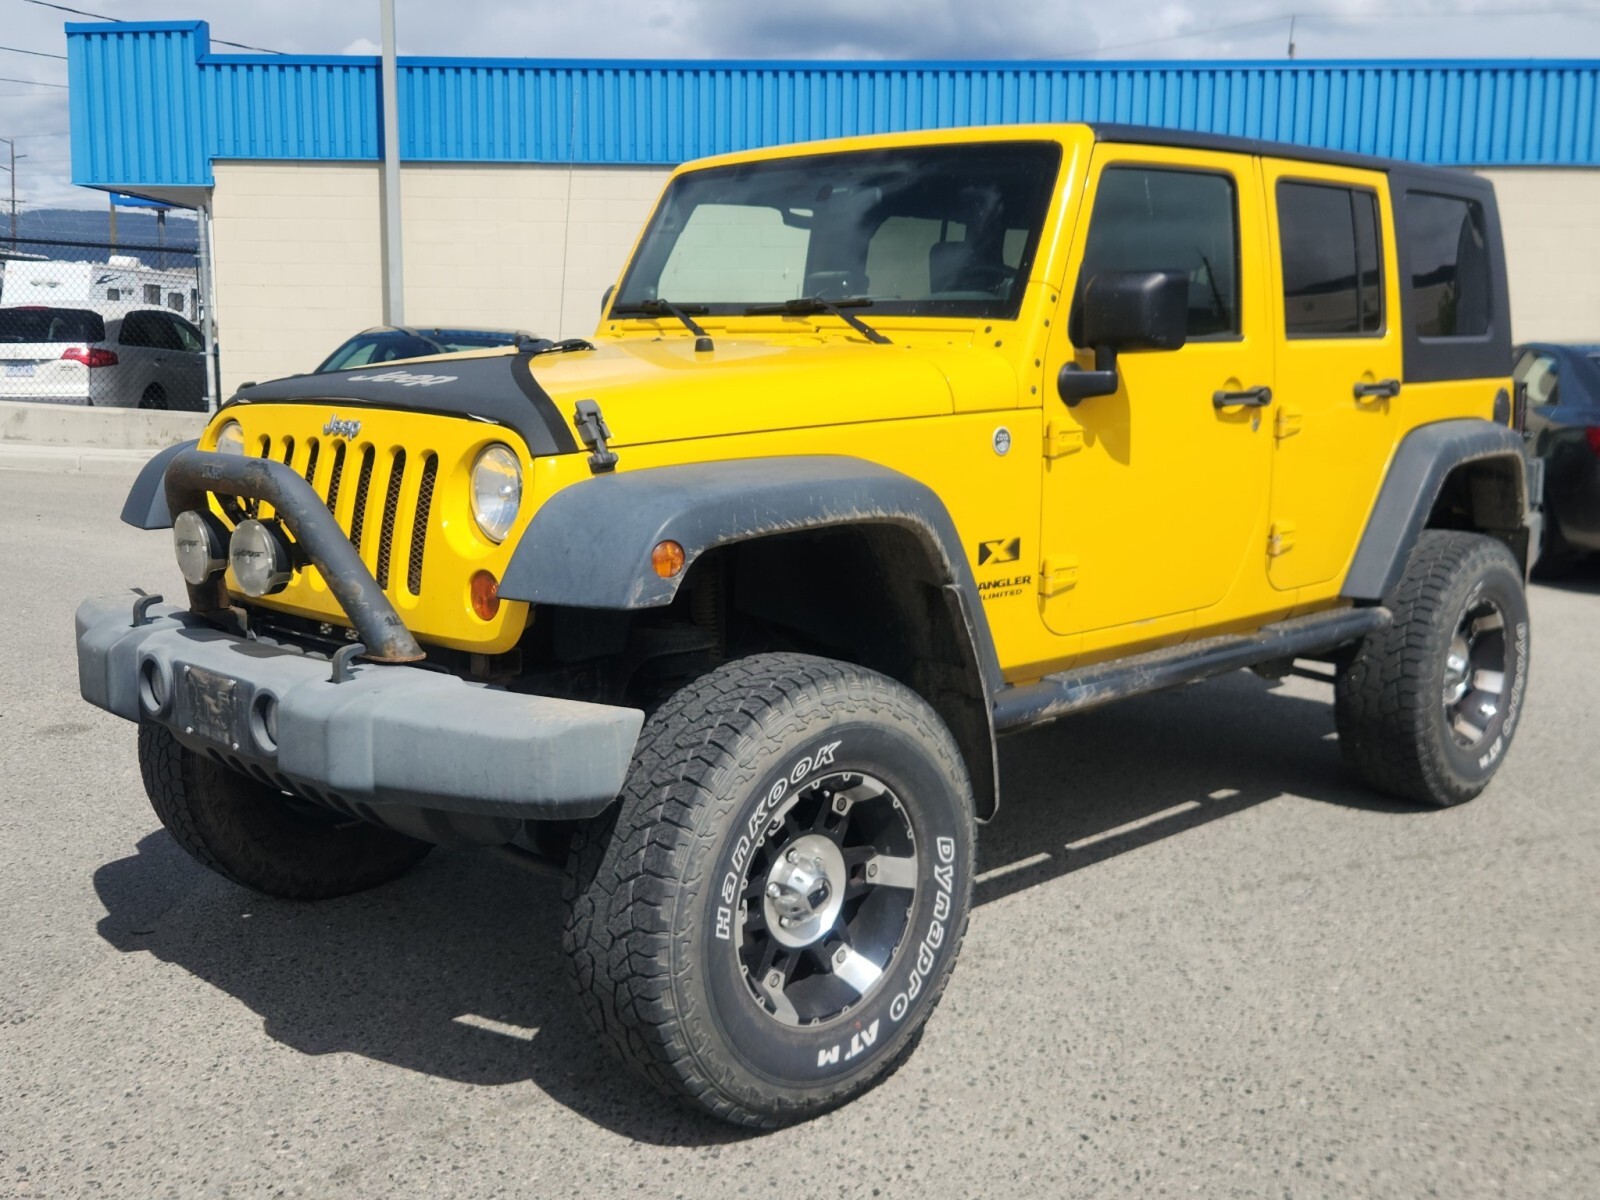 2009 Jeep WRANGLER UNLIMITED X ! MANUAL! LIFTED! 4X4! BUSH BAR! READY TO PLAY!